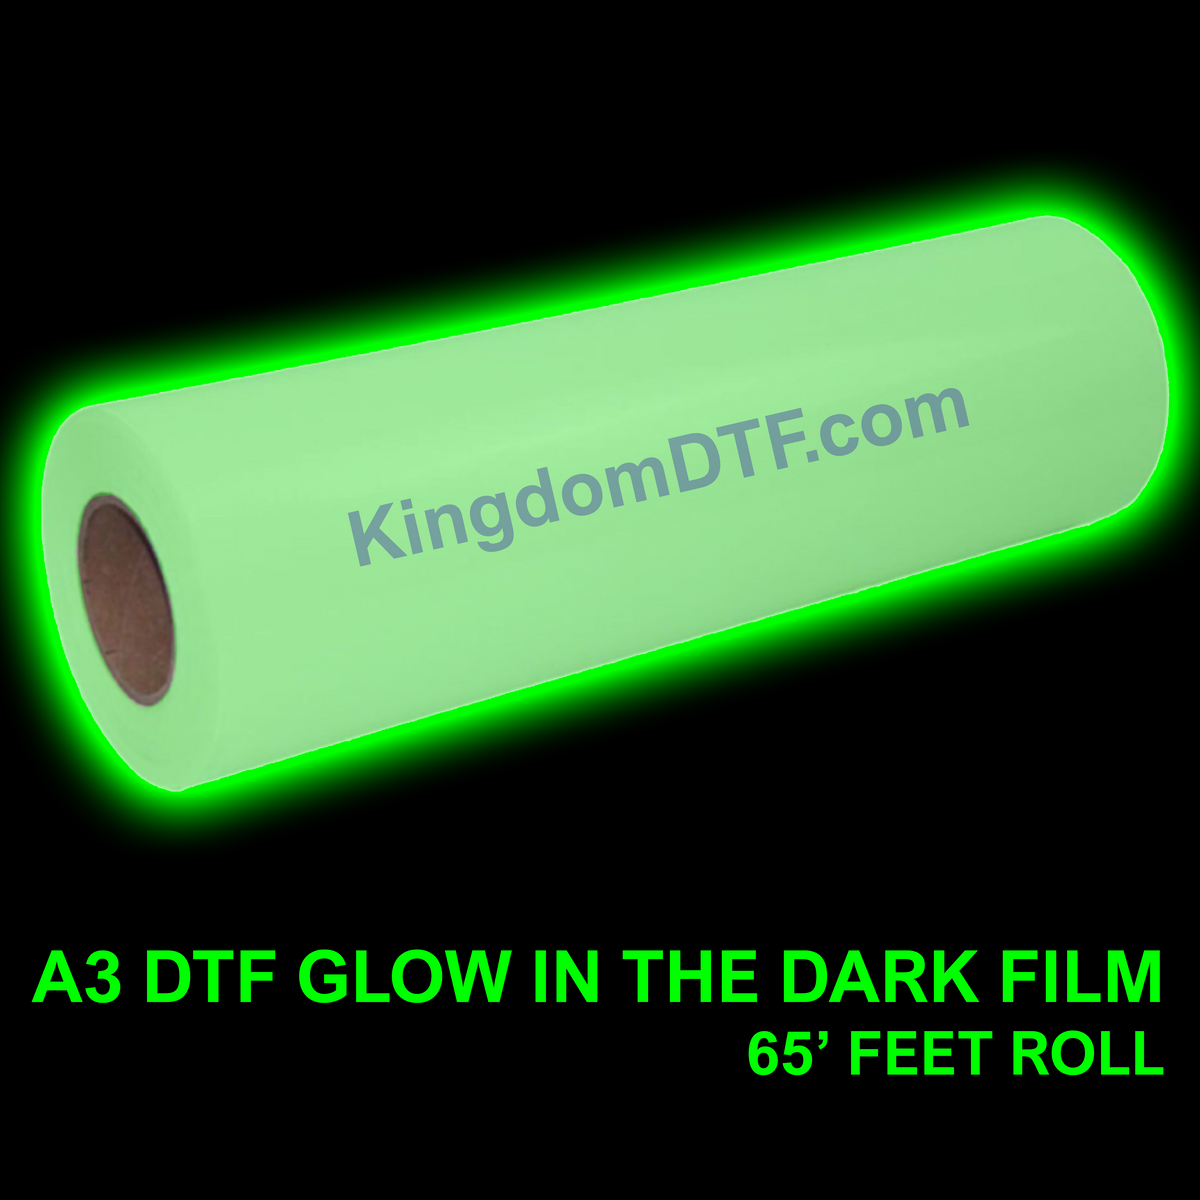 Kingdom DTF® - Best DTF Supplies, UV DTF Supplies, Printers and More!